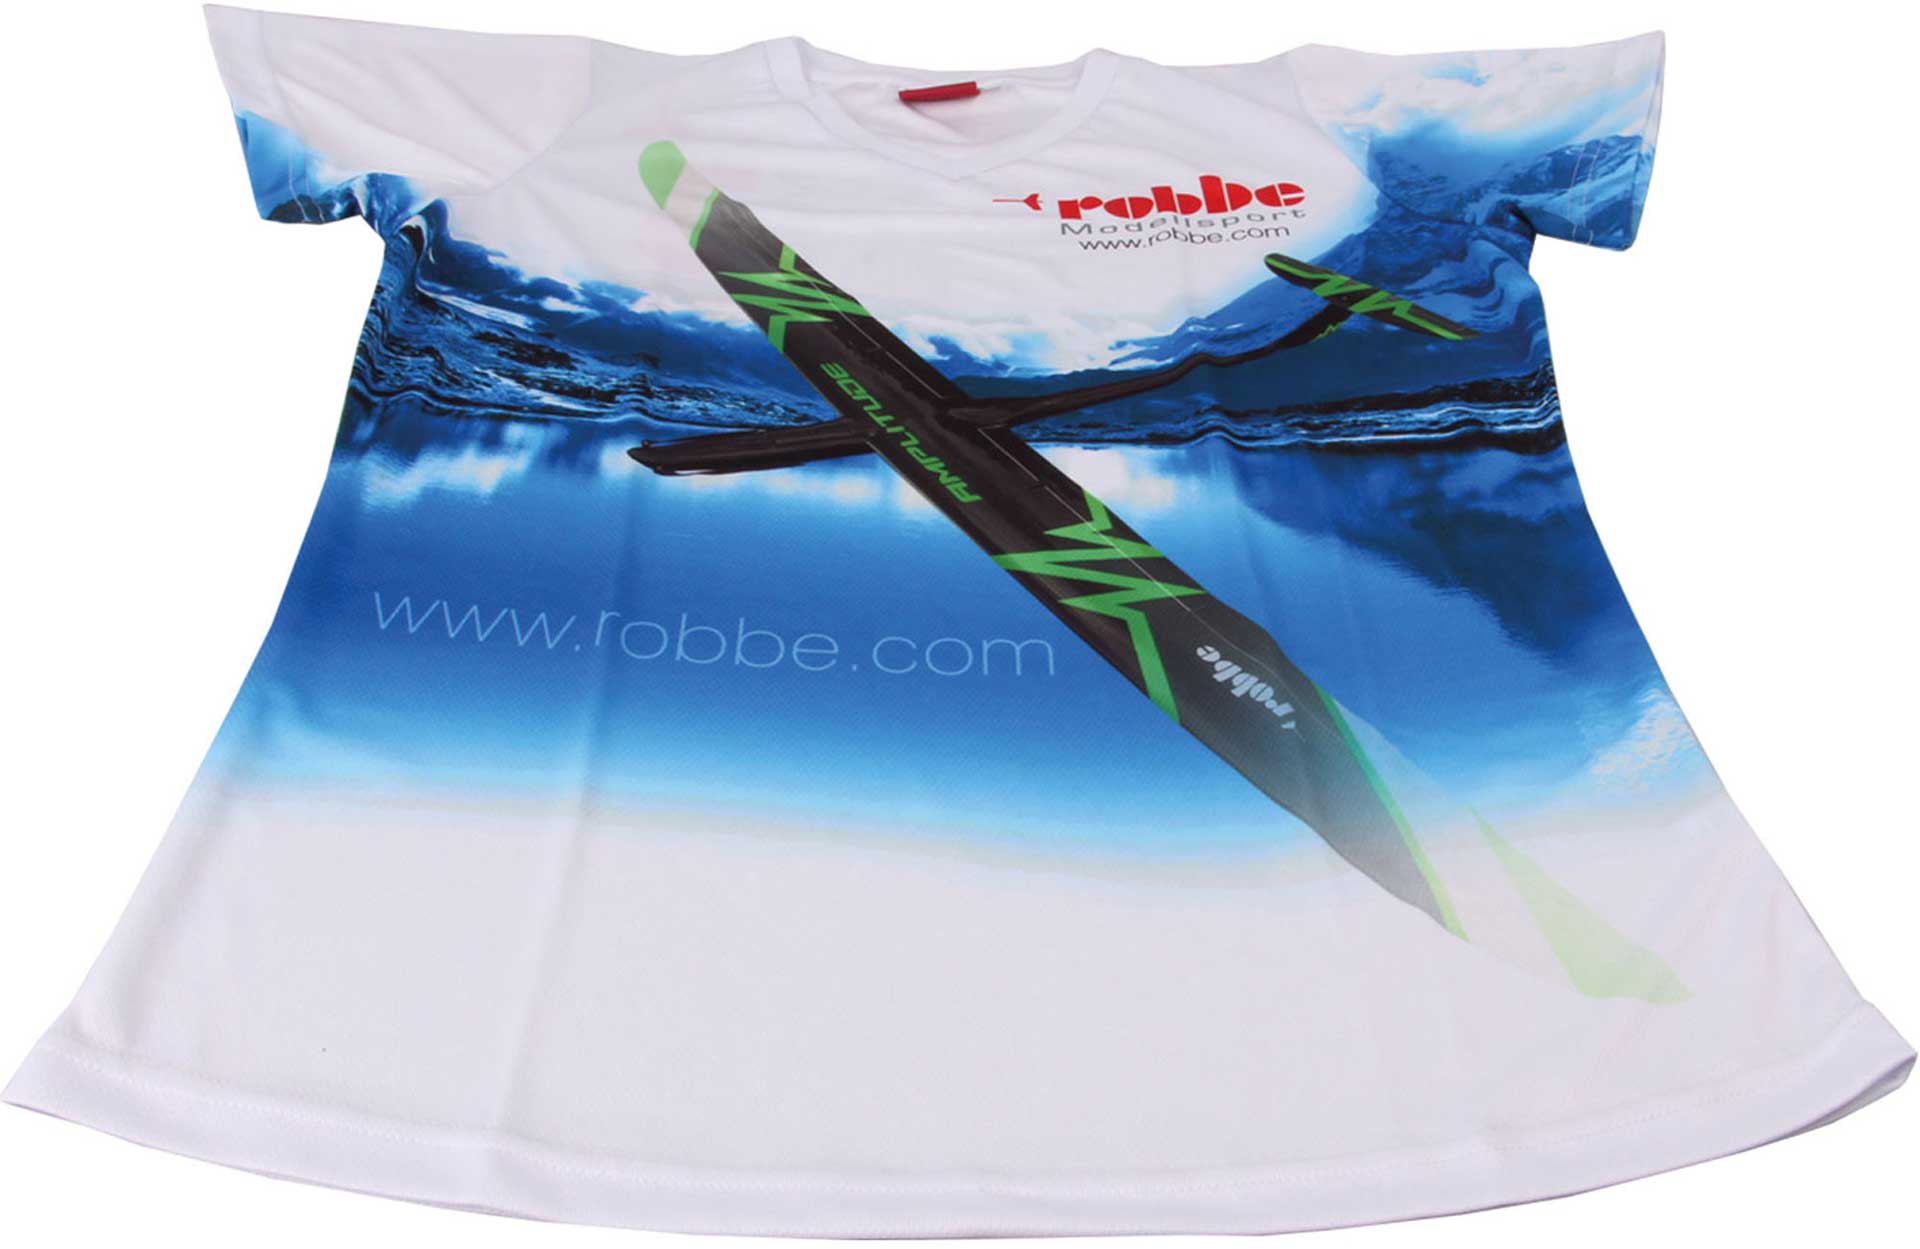 Robbe Modellsport T-SHIRT "AMPLITUDE" ROBBE TAILLE M